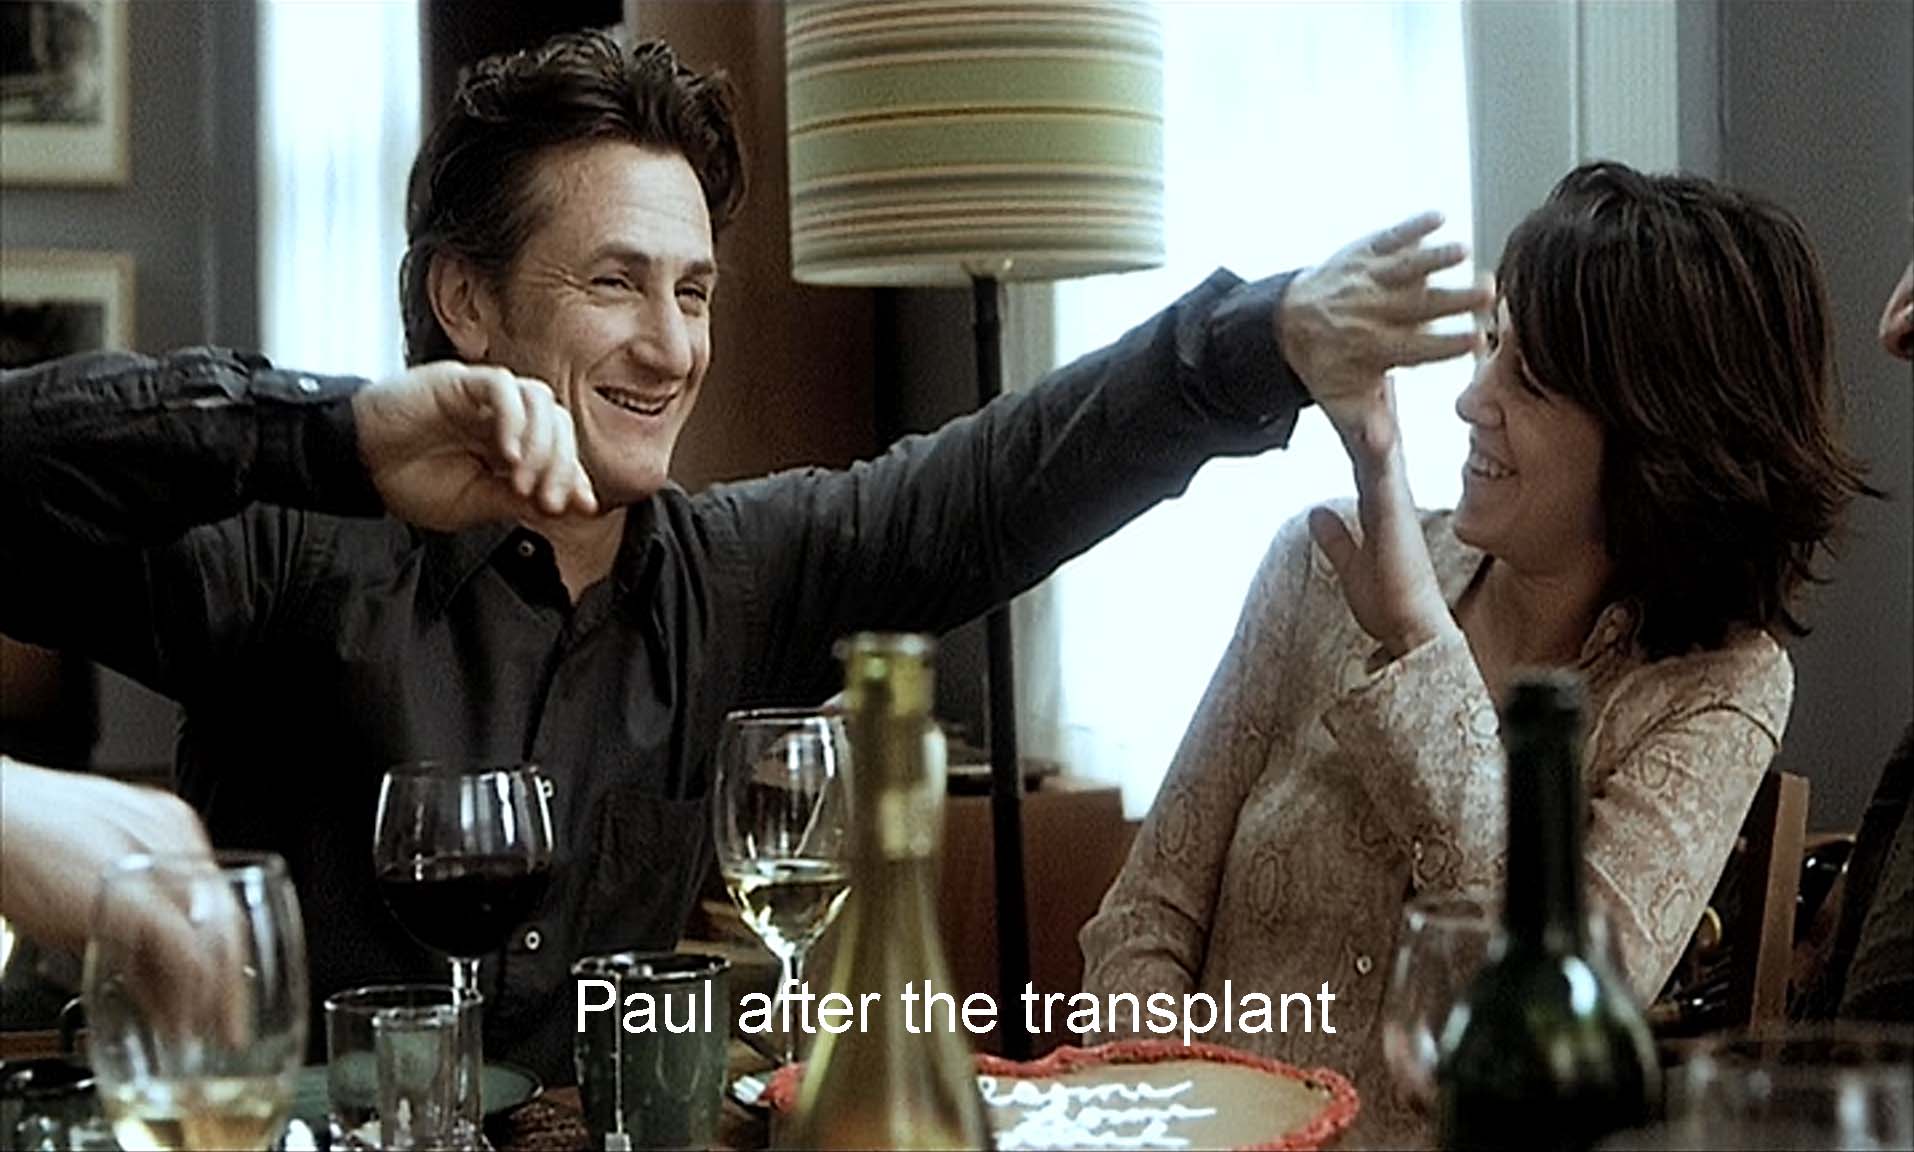 Paul after the transplant